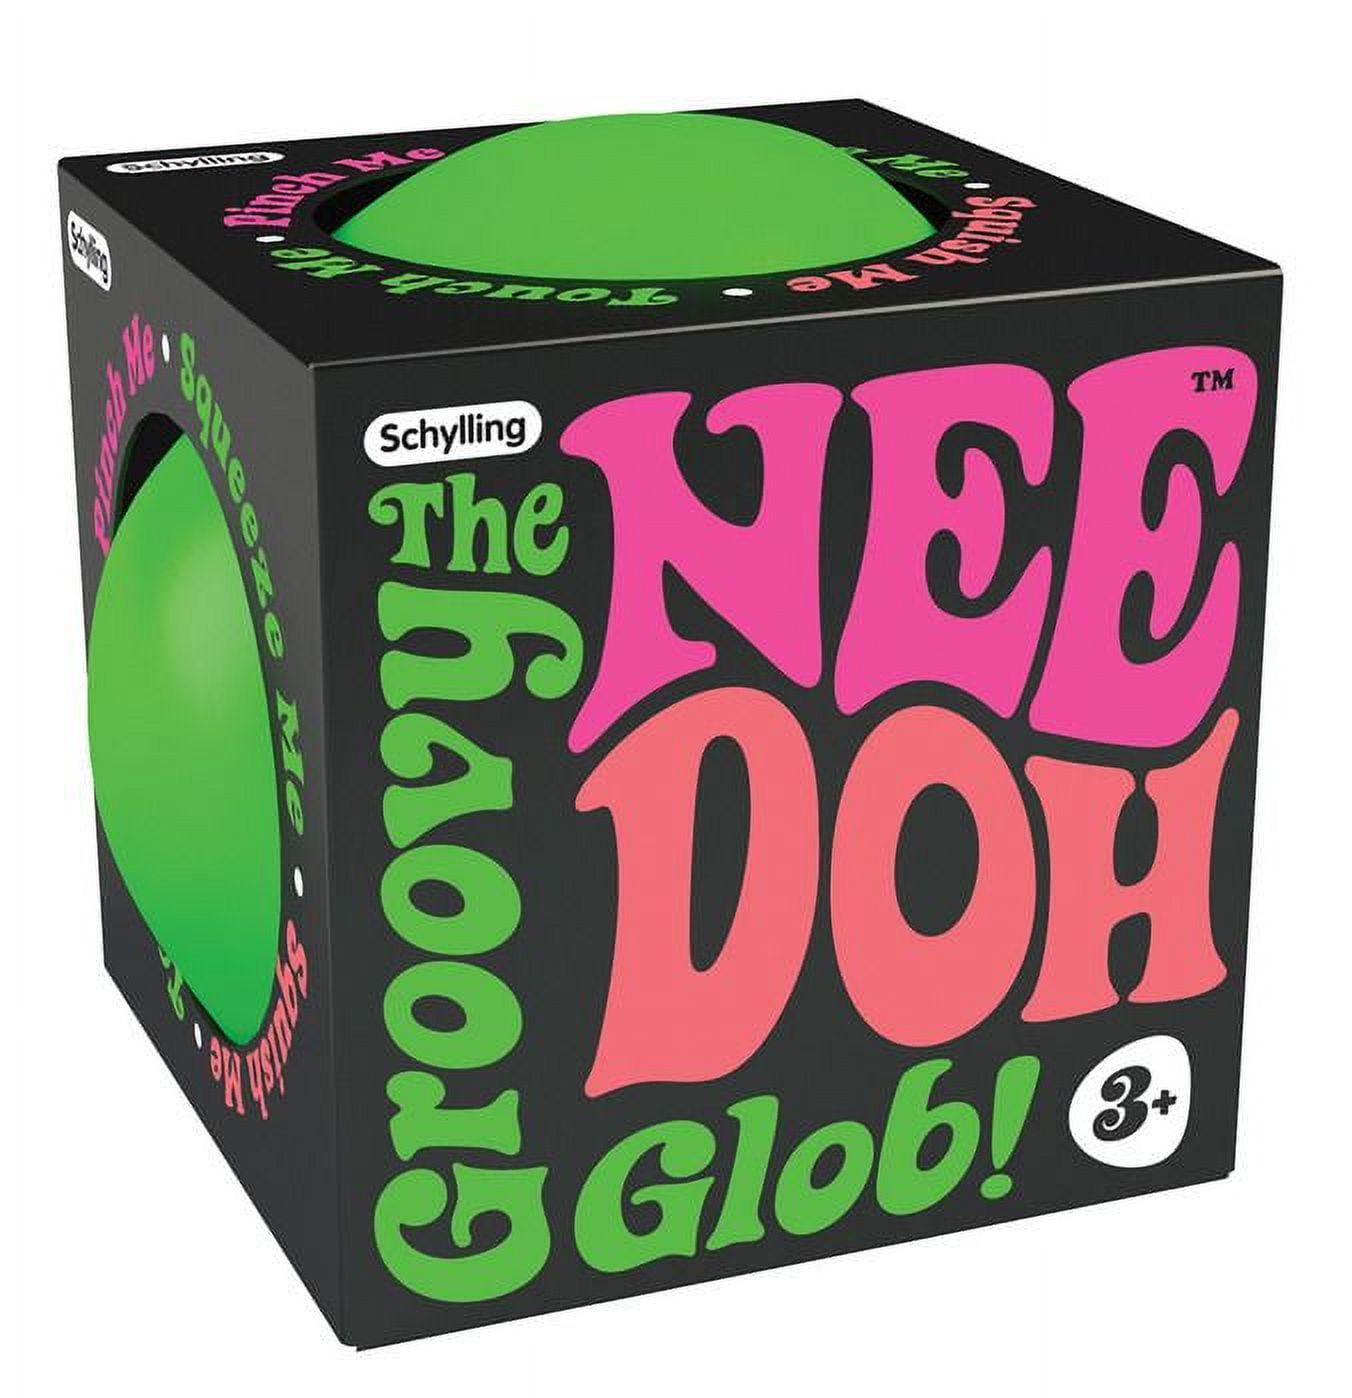 Nee Doh - Super Size - Green, Blue, Purple, or Pink — Bird in Hand